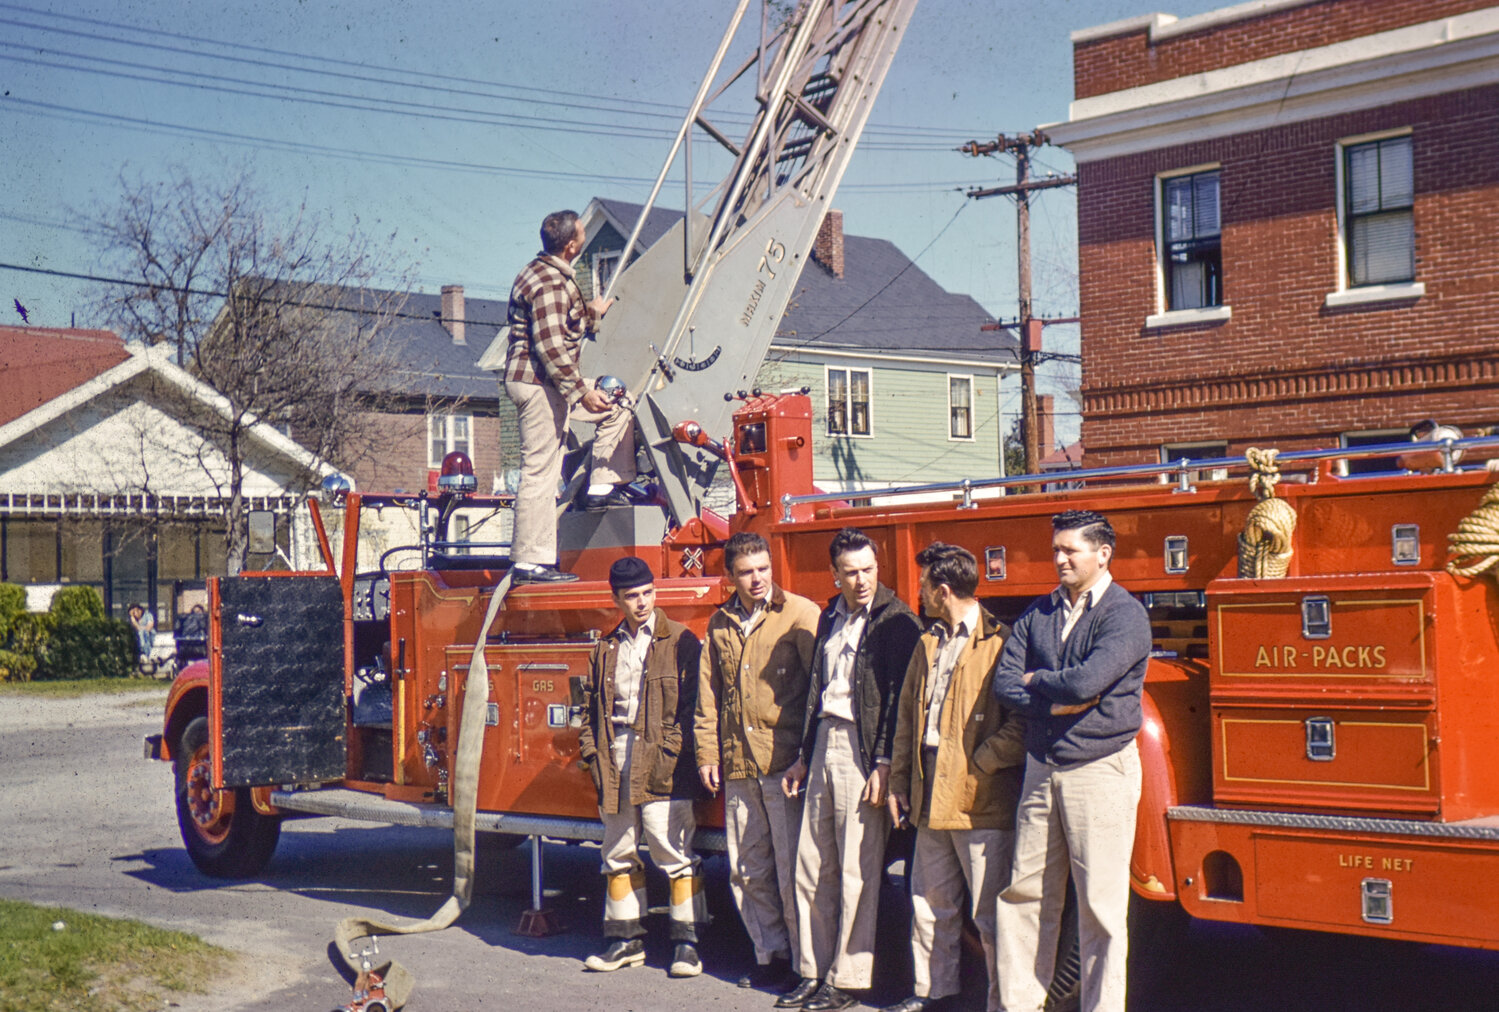 A LOOK BACK IN TIME: Warren also submitted this photo in recognition of the 100th anniversary. Though he is not sure when it was taken it shows a group of firefighters that make up the Cranston Fire Department’s legacy.